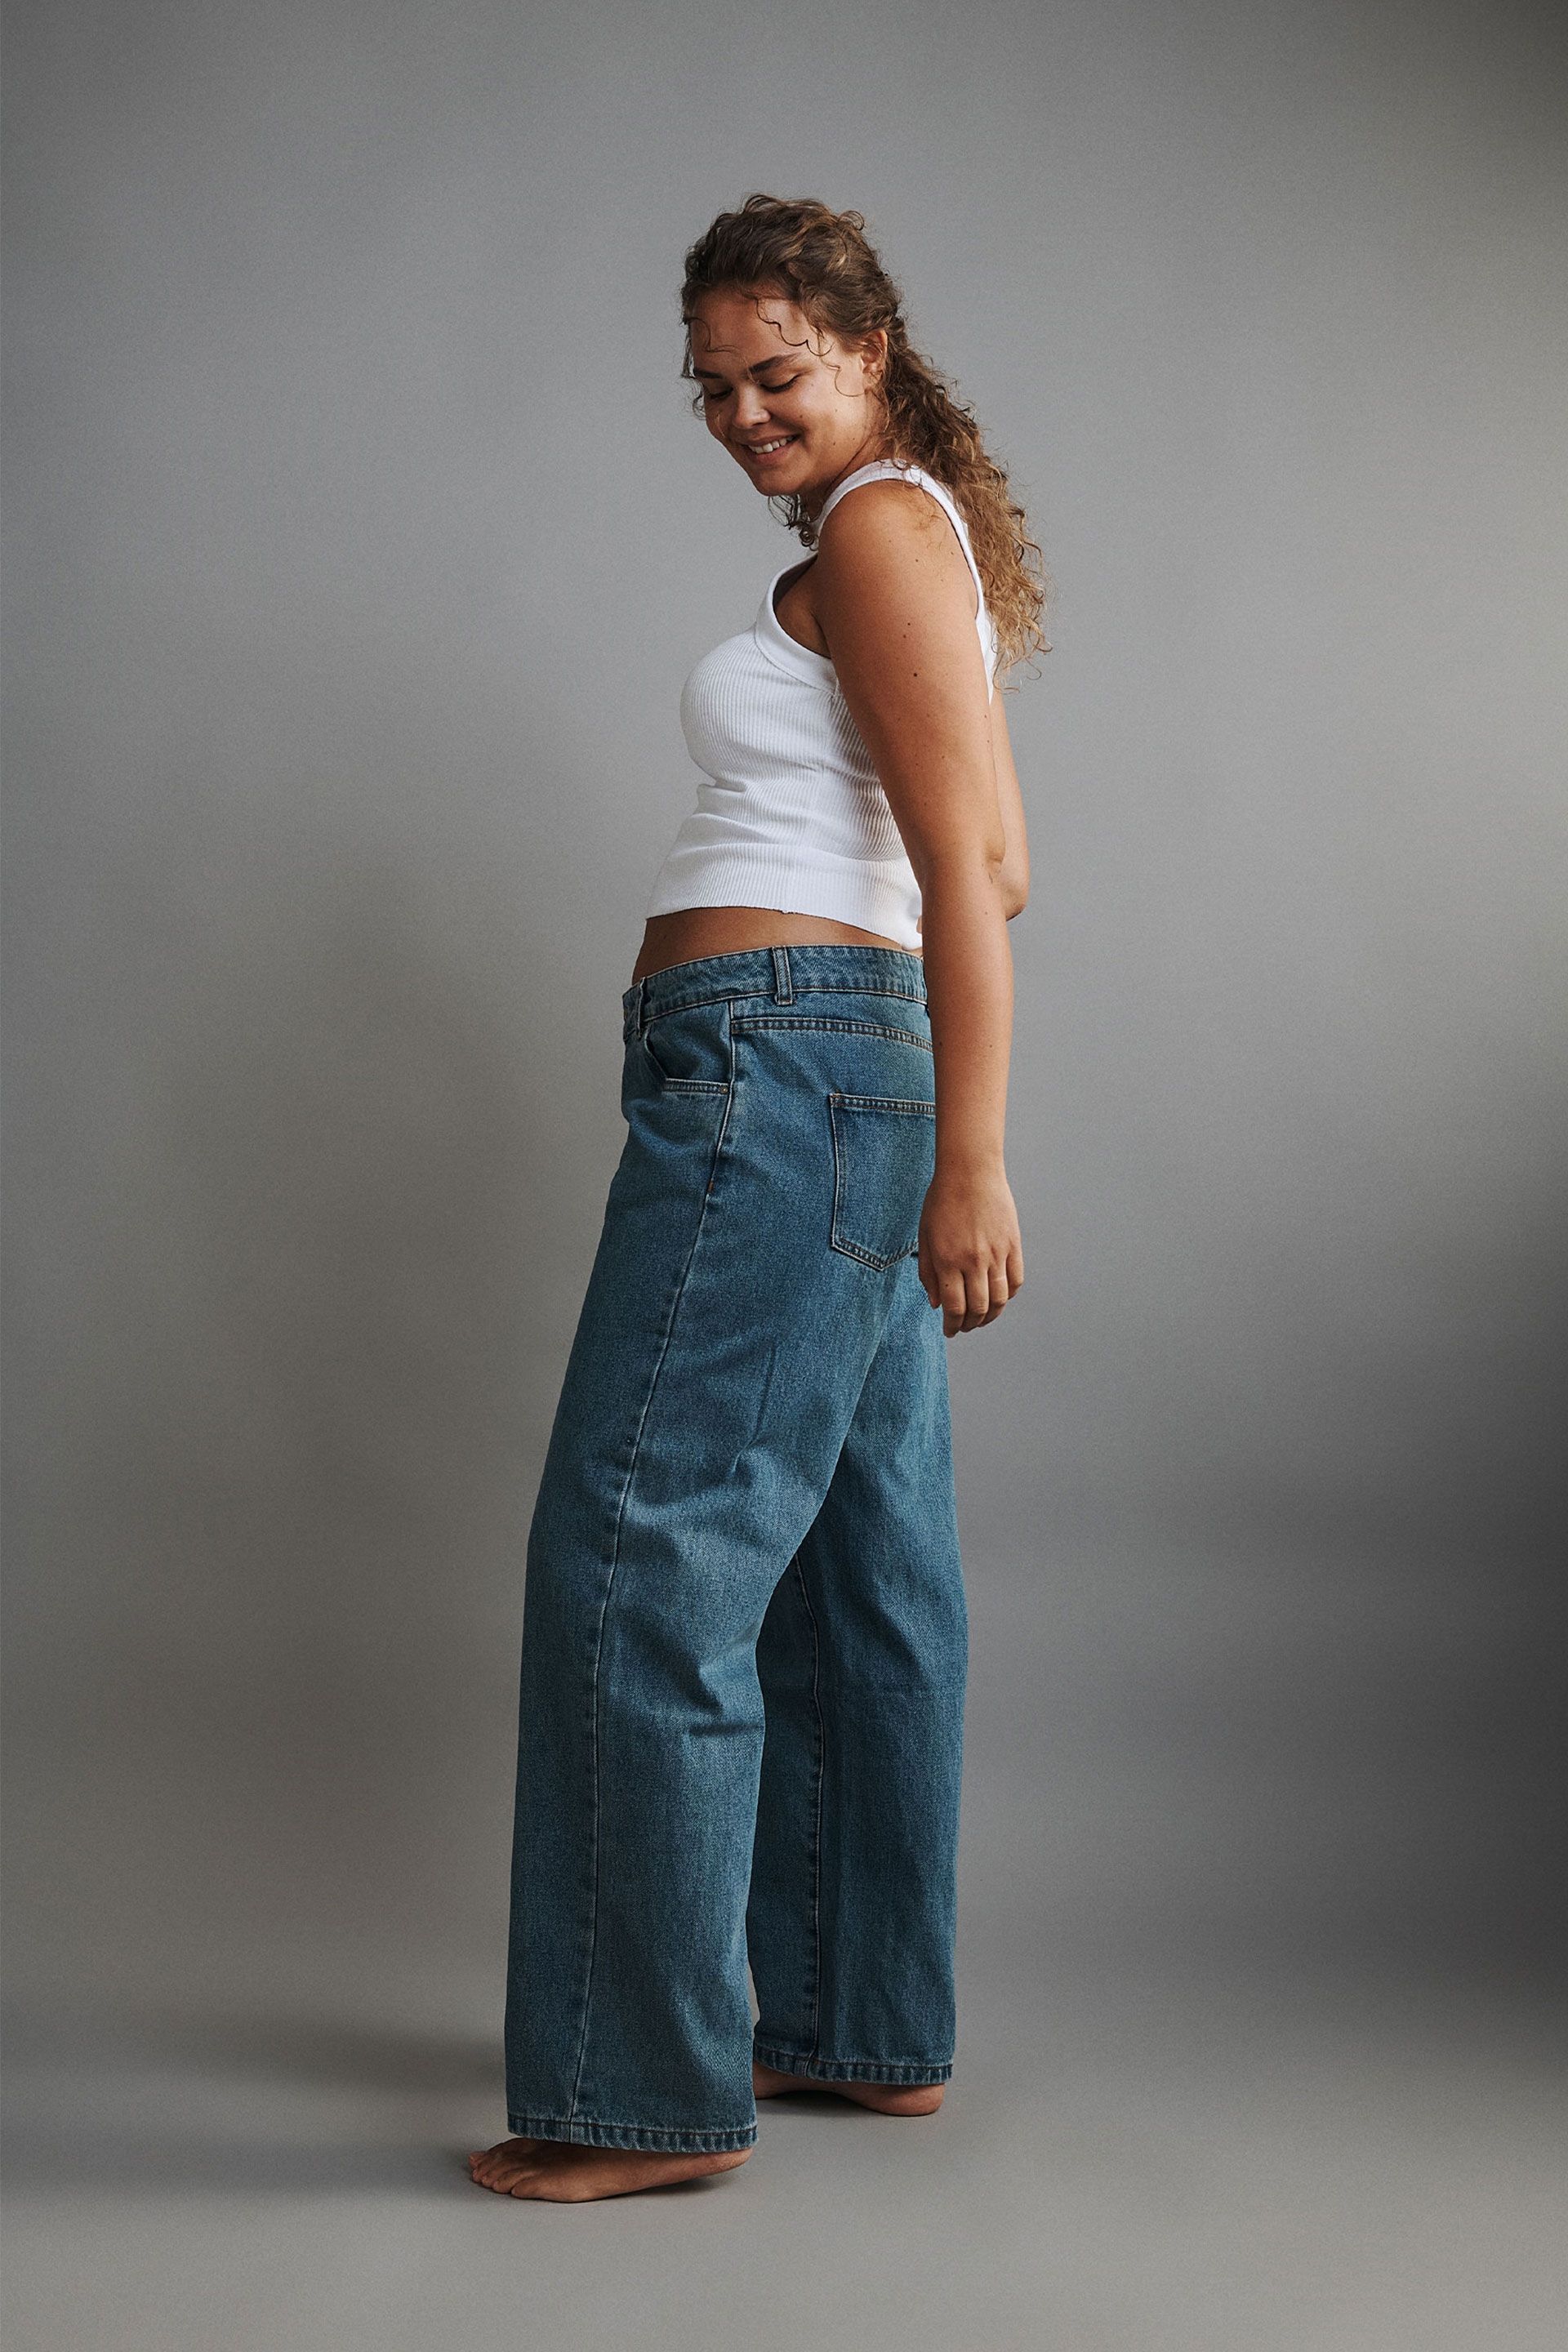 Billie Jeans - High Waisted Cotton Distressed Mom Denim Jeans in Mid Blue  Wash | Showpo USA